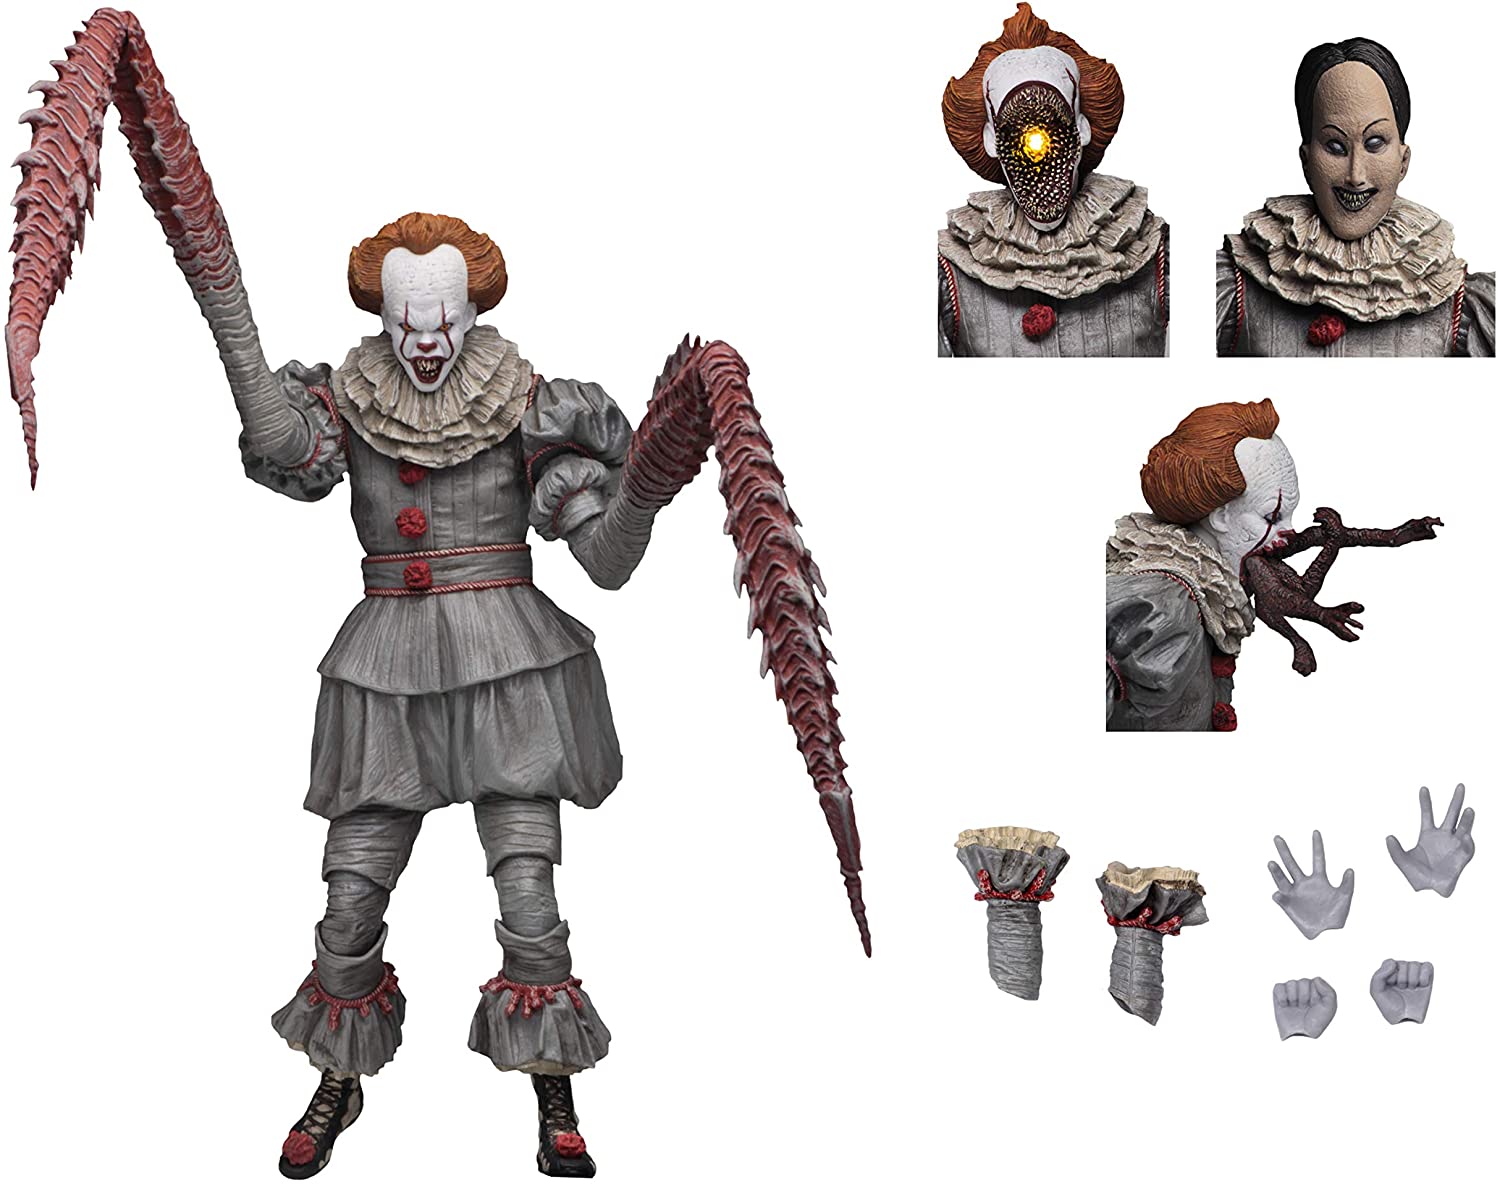 L'action figure di Pennywise il Clown